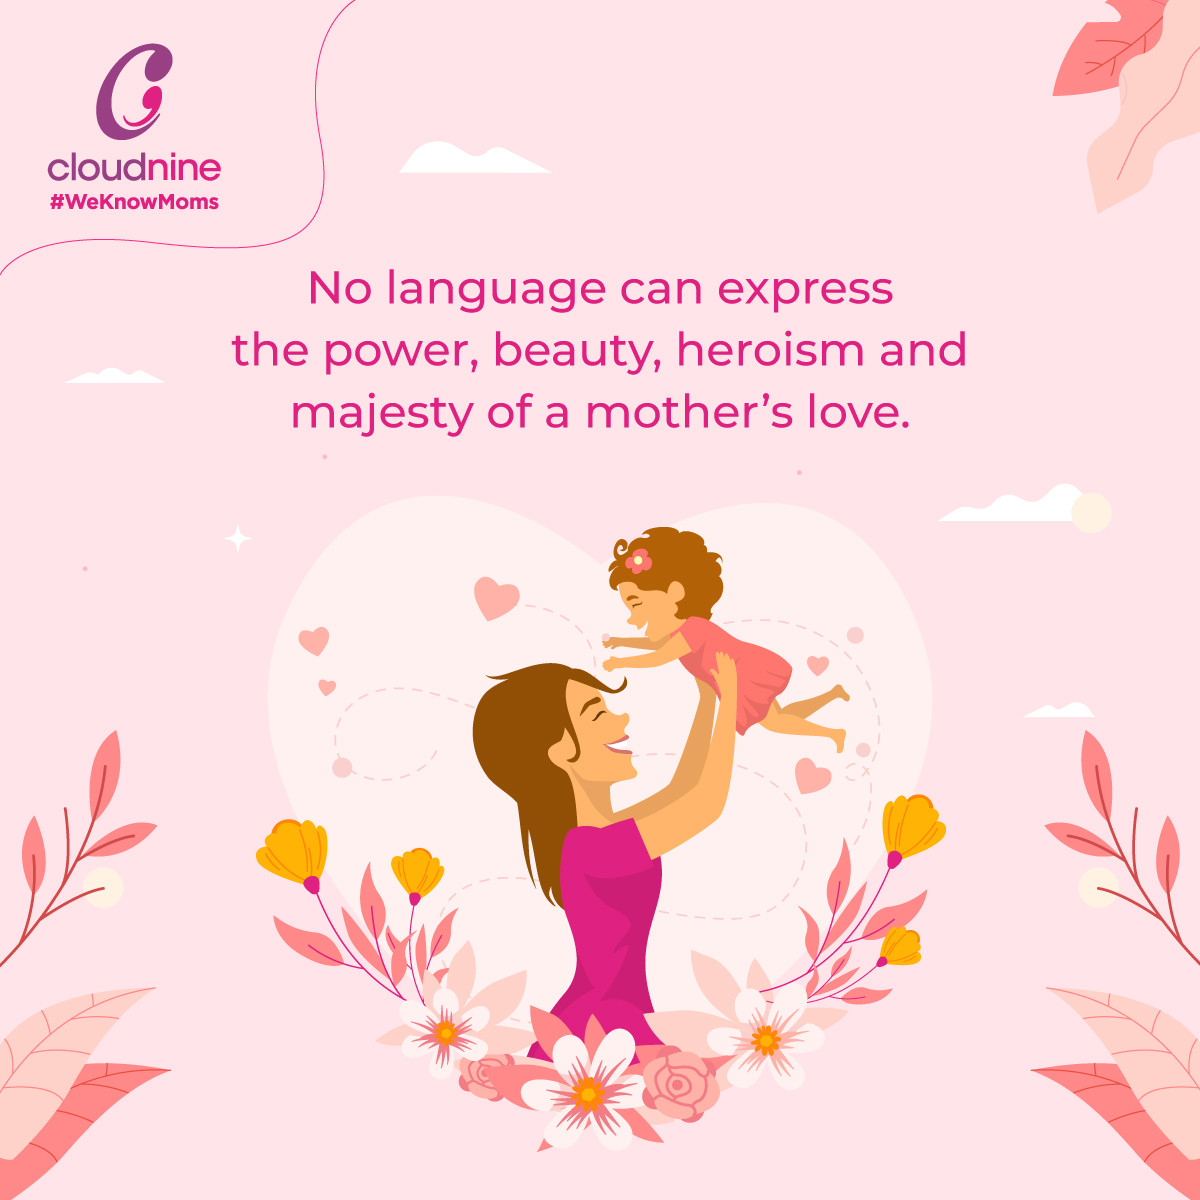 🤱It's truly amazing how a mother's love is so powerful, beautiful, heroic and majestic that no words can do it justice.👩‍👧‍👧 Drop a ❤️ if you can relate and don't forget to share it with your friends. #WeKnowMoms #oncloudnine #motherlove #unconditionallove #motherandchild